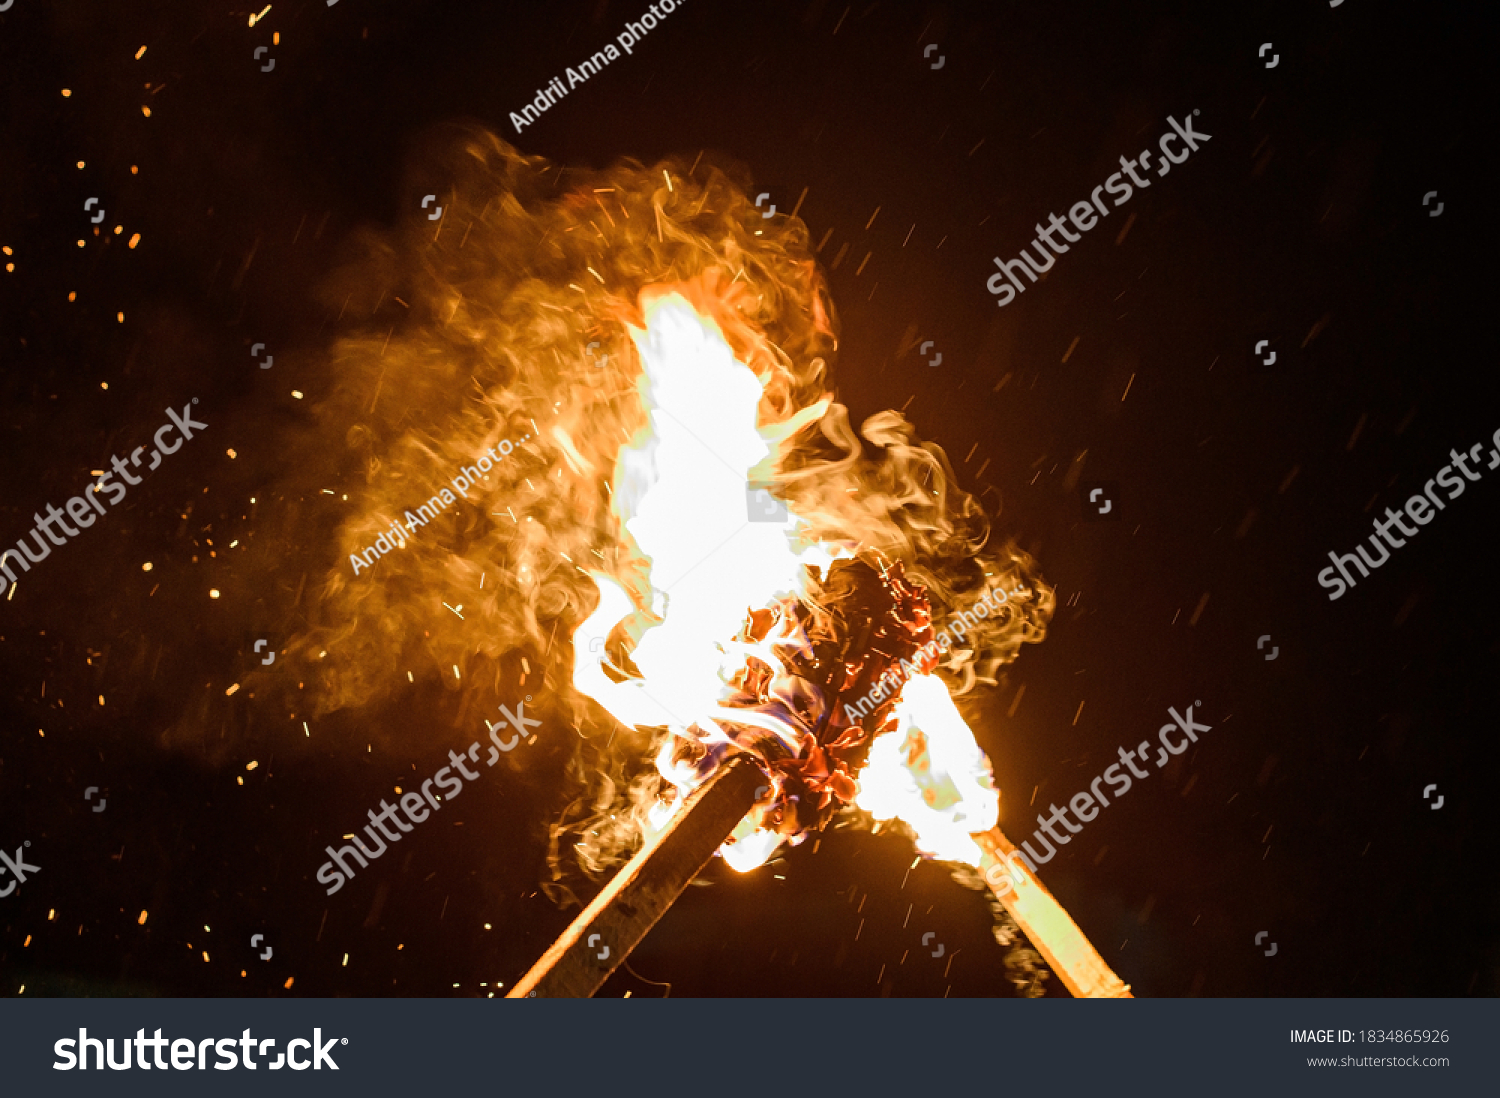 two burning torches on a dark background, smoke and fire from burning torches. #1834865926